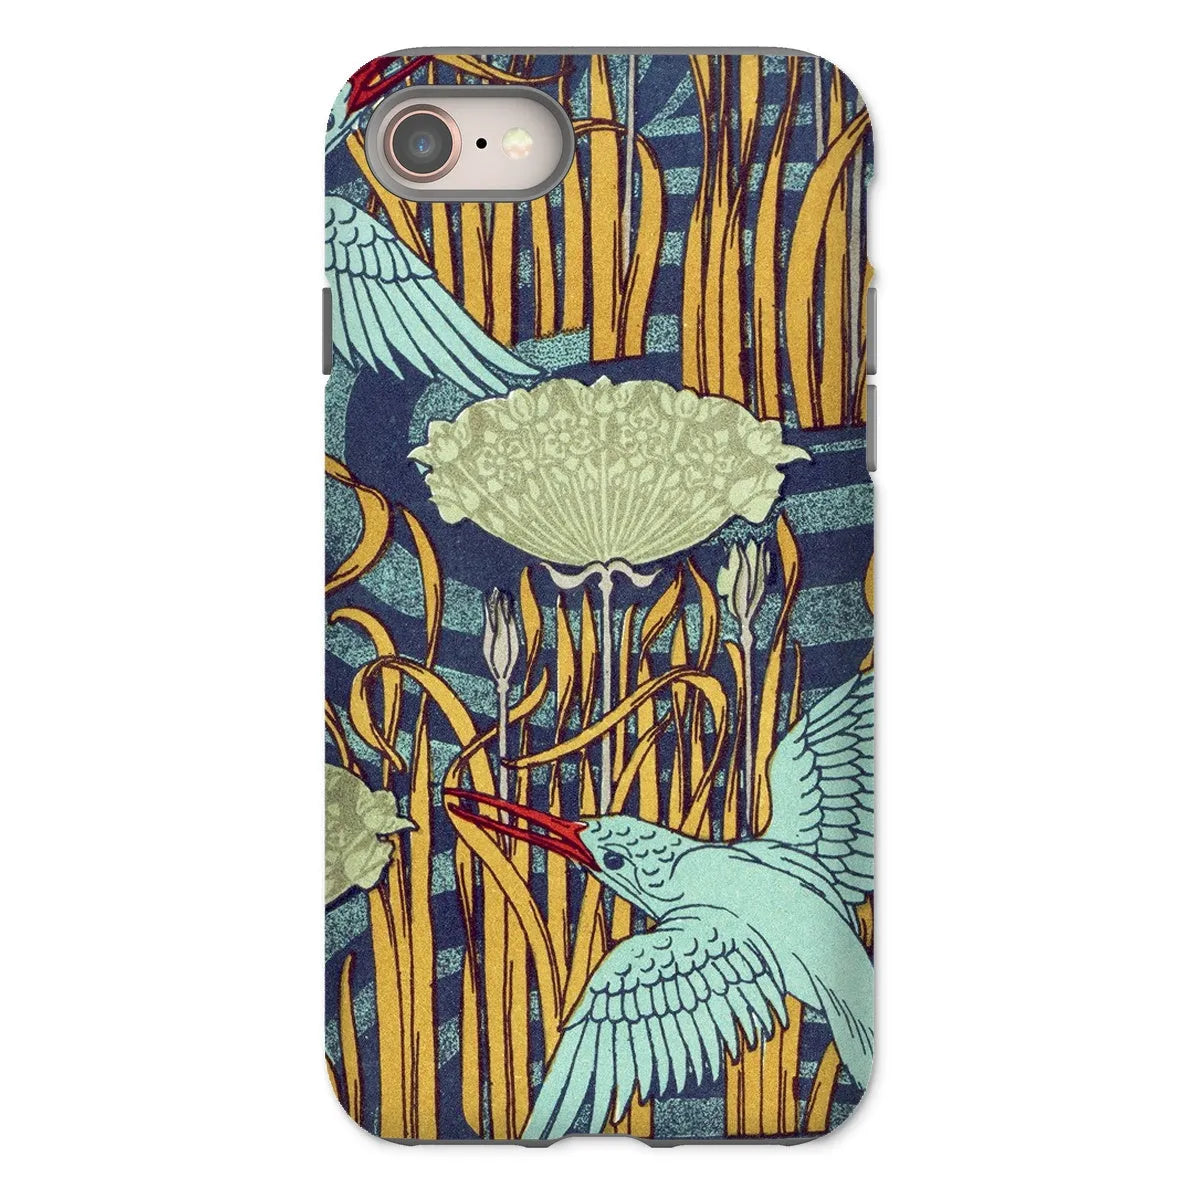 Kingfishers French Art Phone Case - Maurice Pillard Verneuil - Iphone 8 / Matte - Mobile Phone Cases - Aesthetic Art